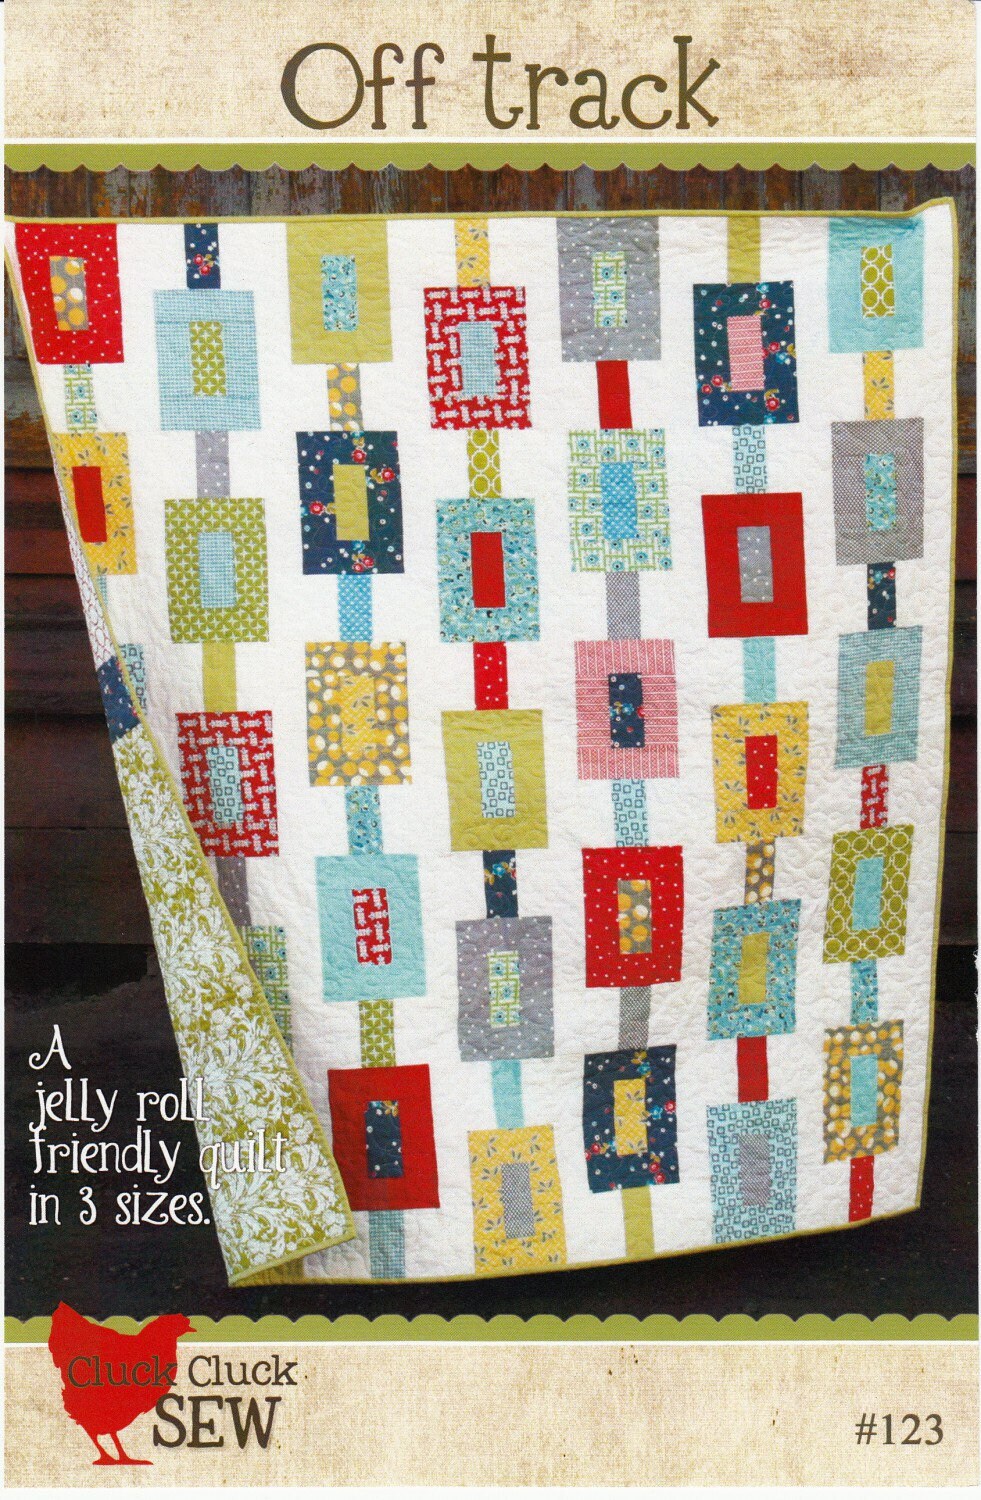 Off Track Quilt Pattern - Cluck Cluck Sew - Jelly Roll Friendly - 3 Sizes